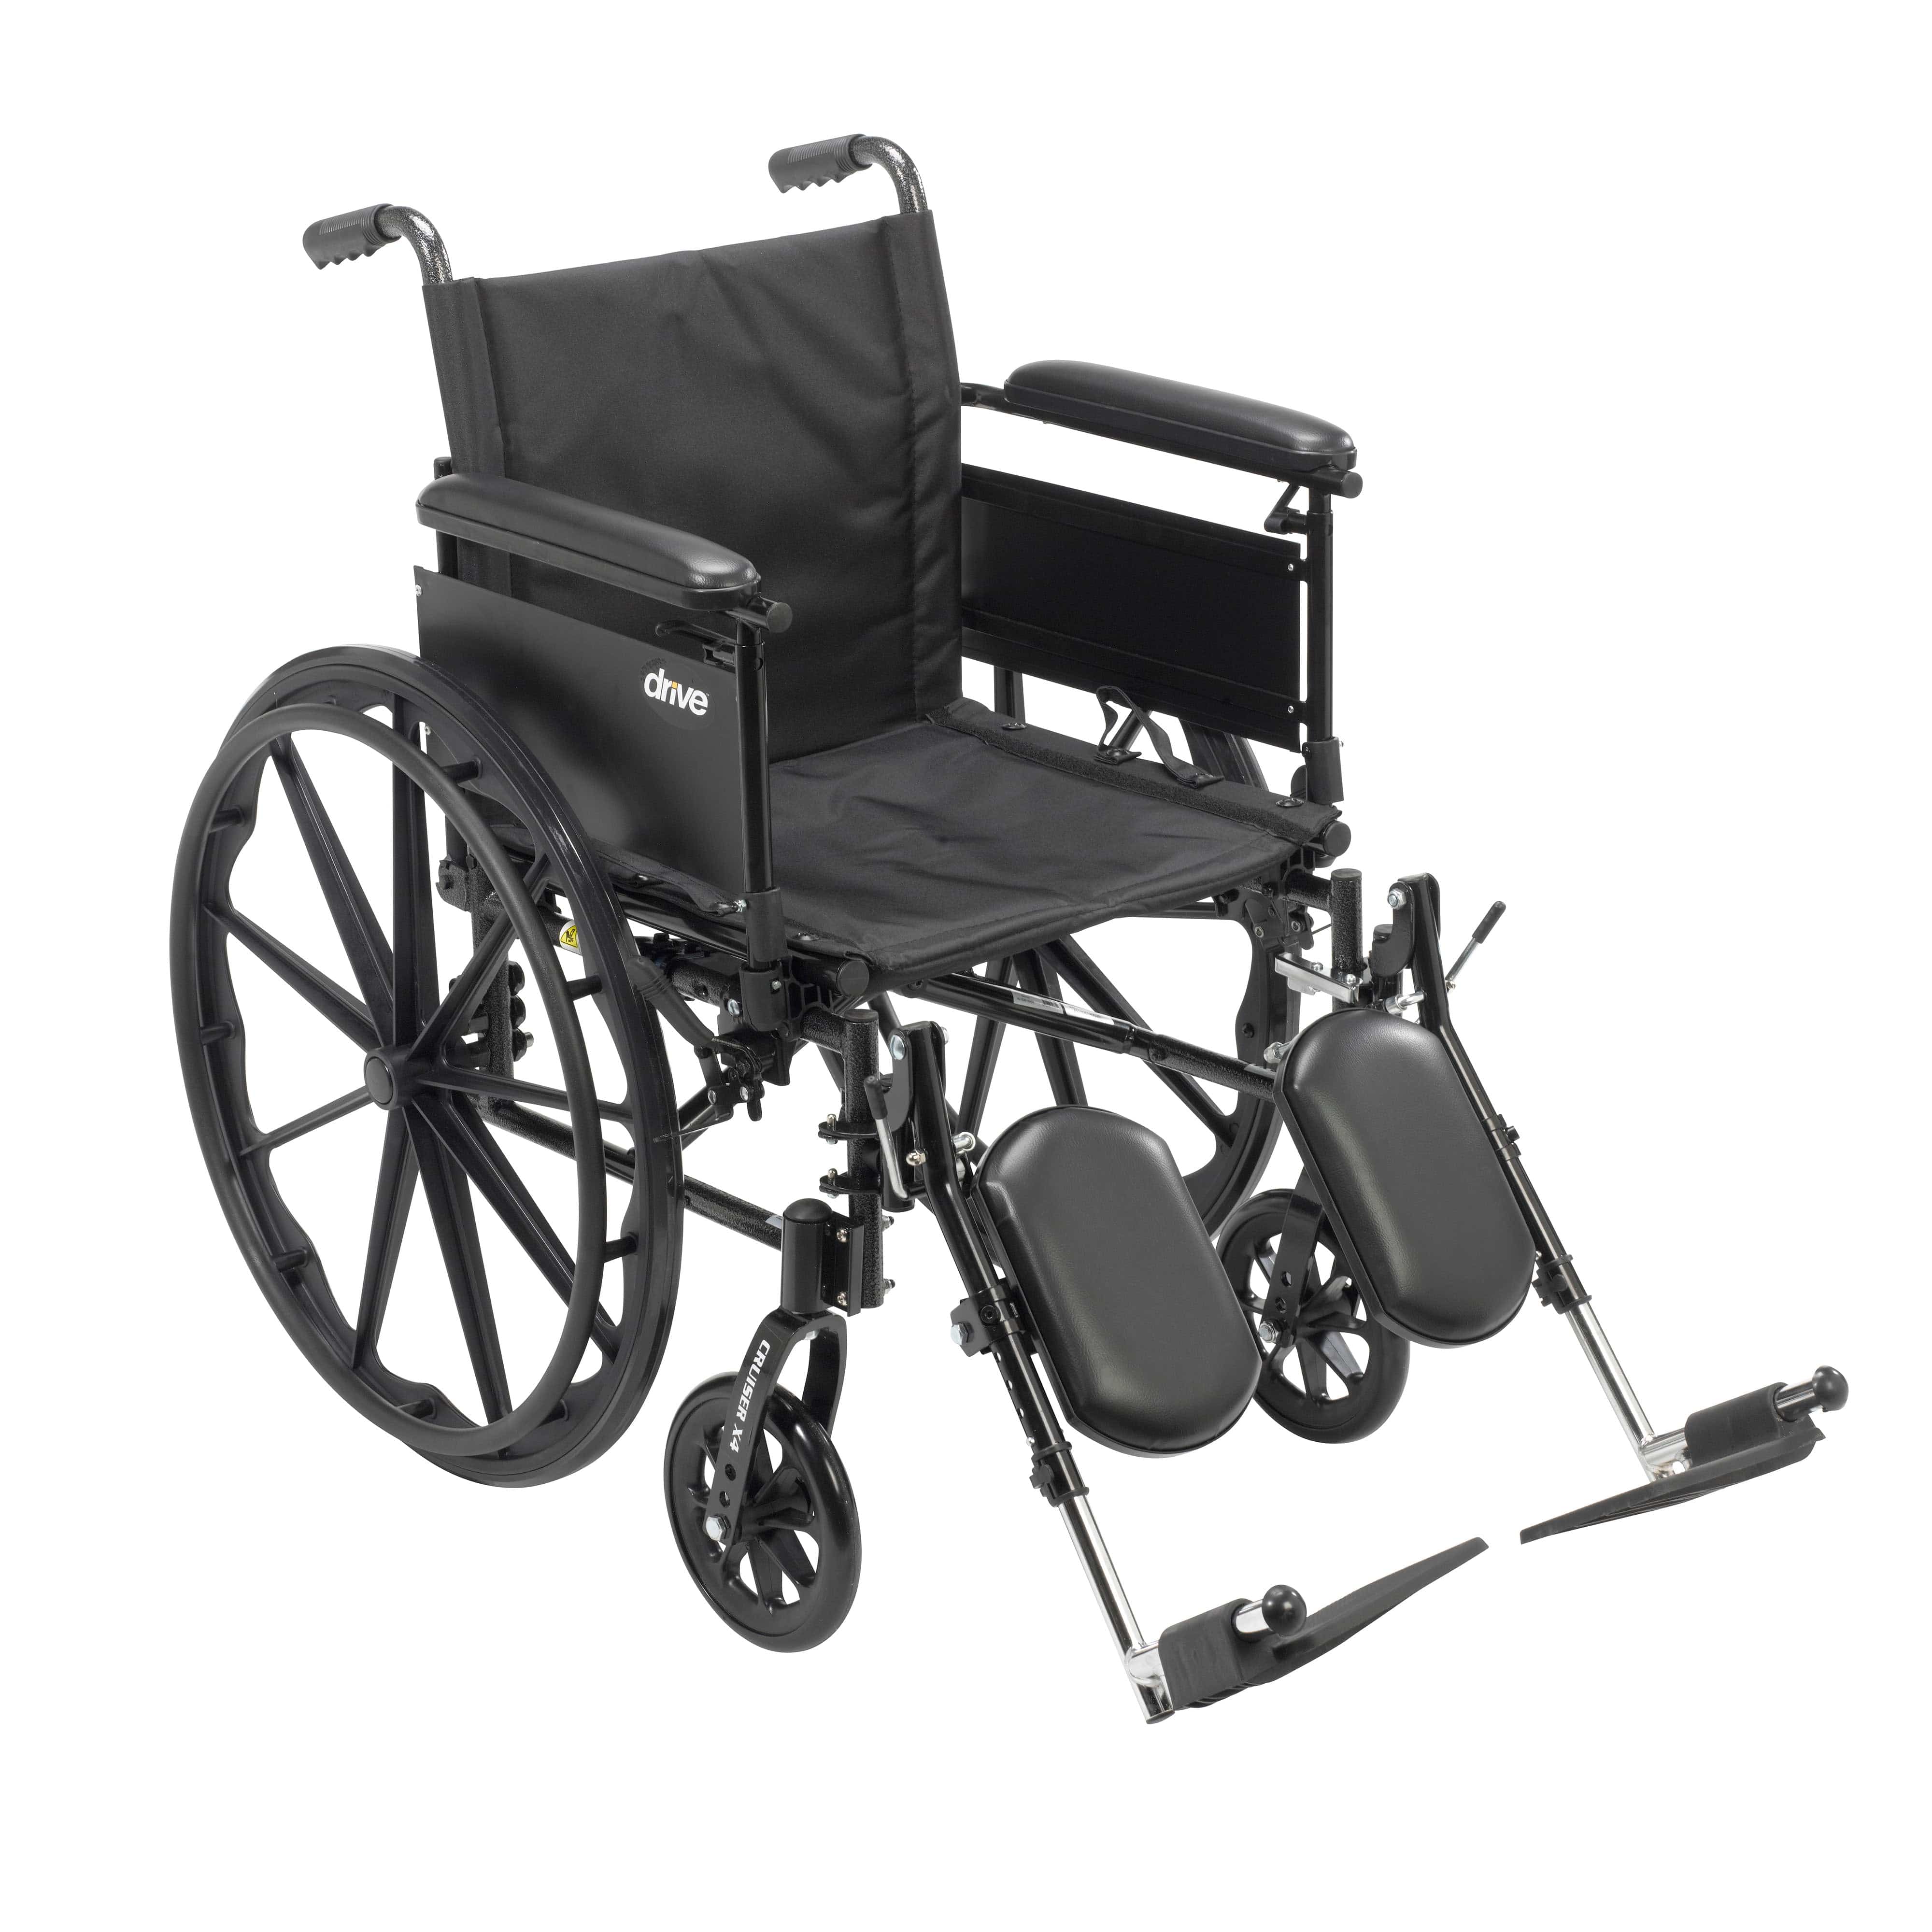 Drive Medical Wheelchairs/Lightweight Wheelchairs Full Arms / Elevating Leg Rests / 16" Seat Drive Medical Cruiser X4 Lightweight Dual Axle Wheelchair with Adjustable Detatchable Arms